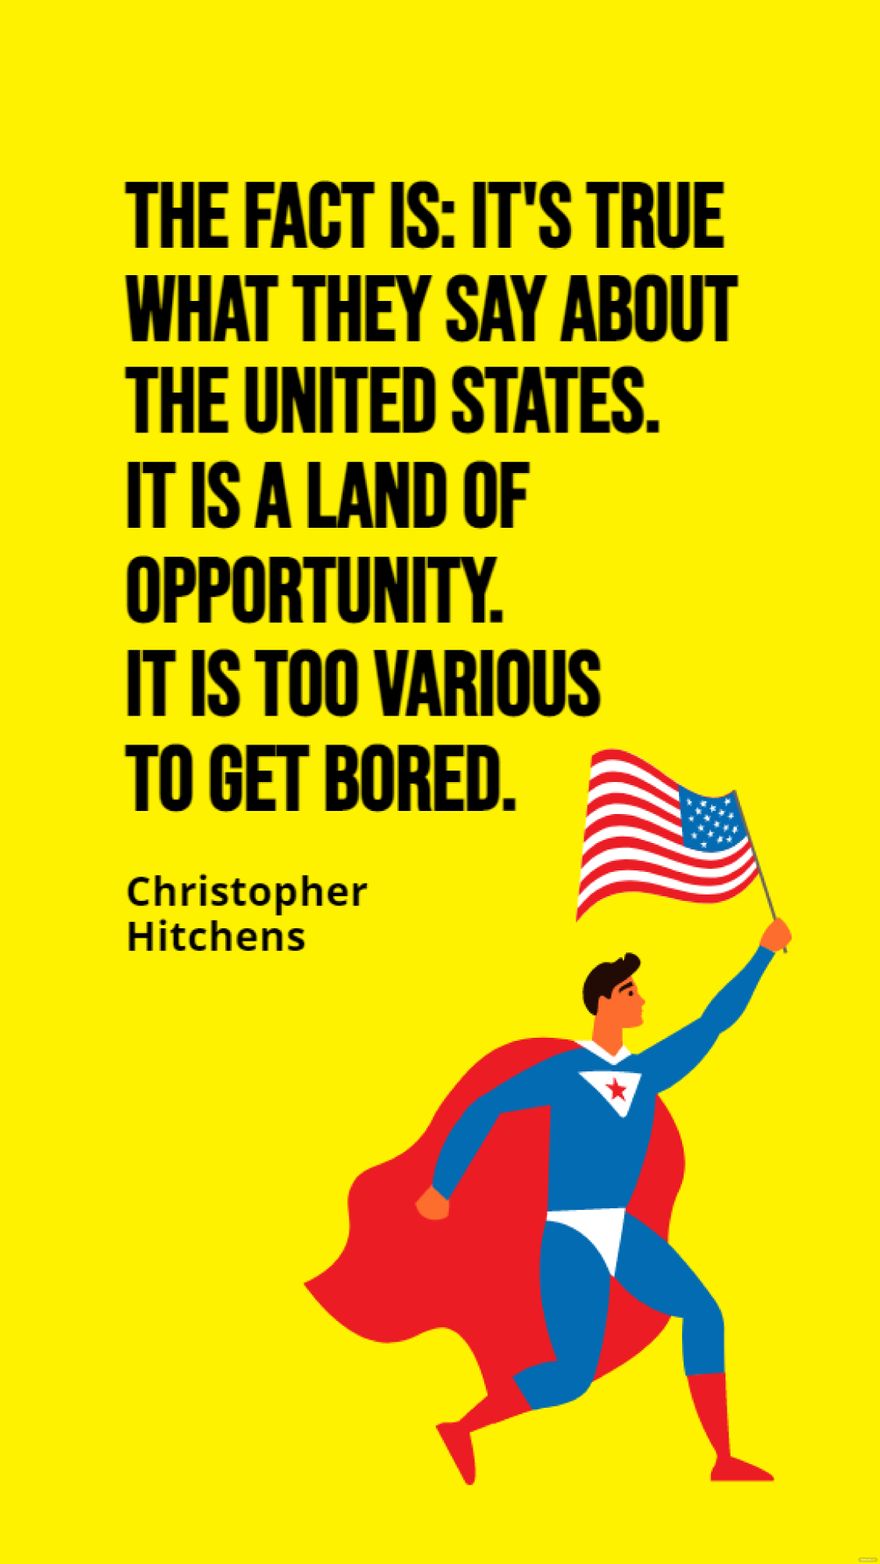 Christopher Hitchens - The fact is: It's true what they say about the United States. It is a land of opportunity. It is too various to get bored